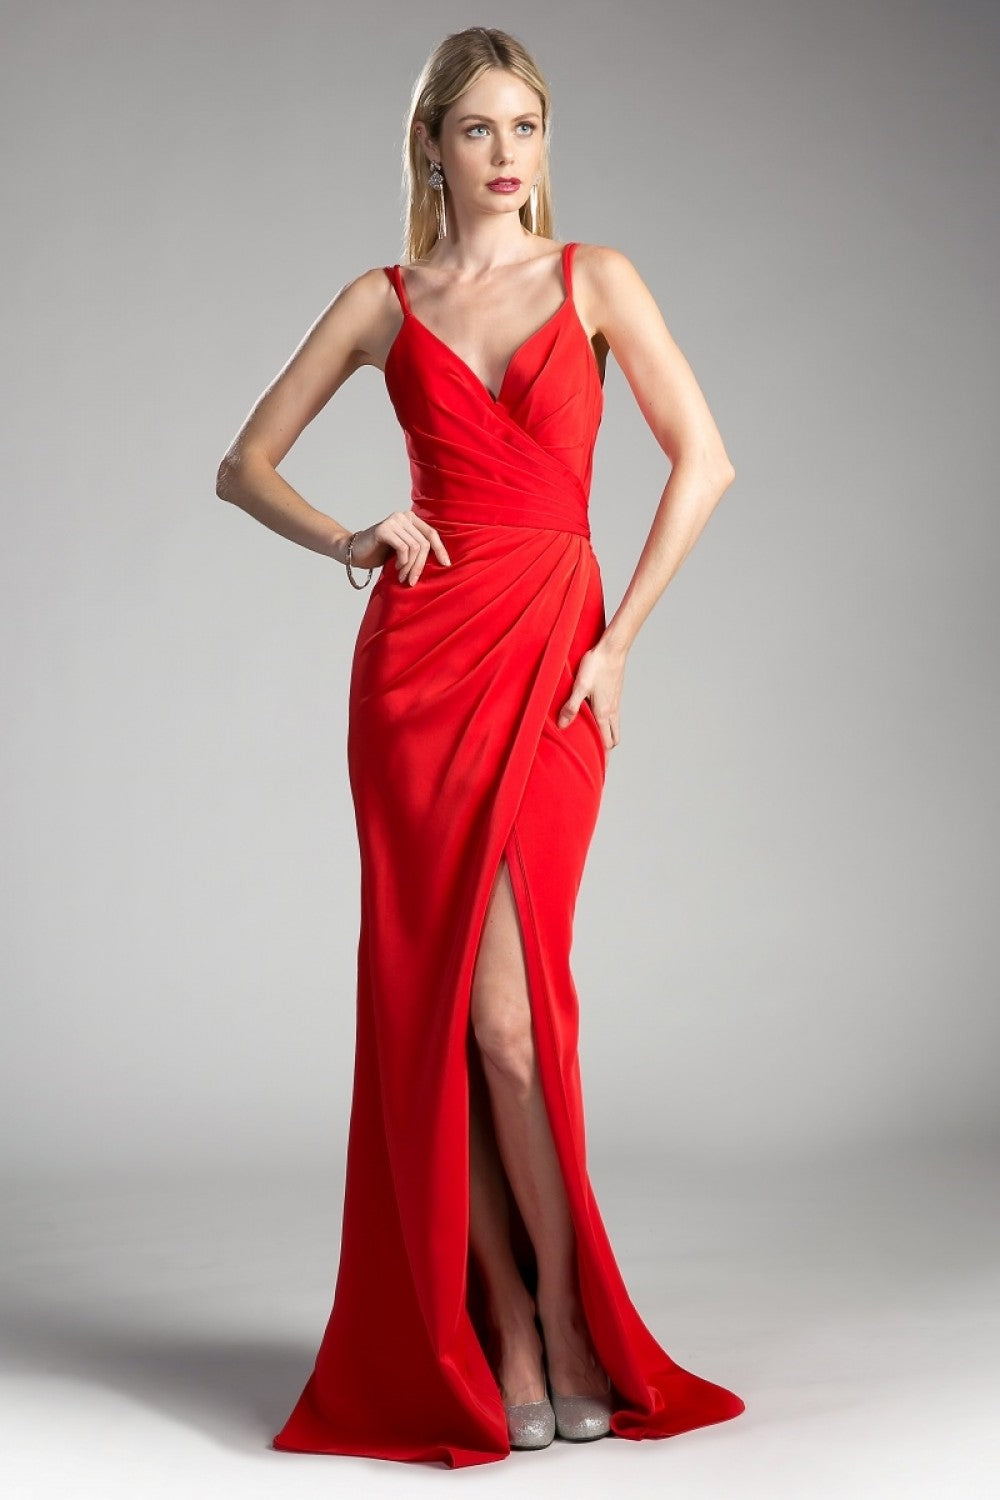 Cinderella Divine - KC1850SC Ruched V-Neck Sheath Evening Gown - 1 pc Red in size 18 Available